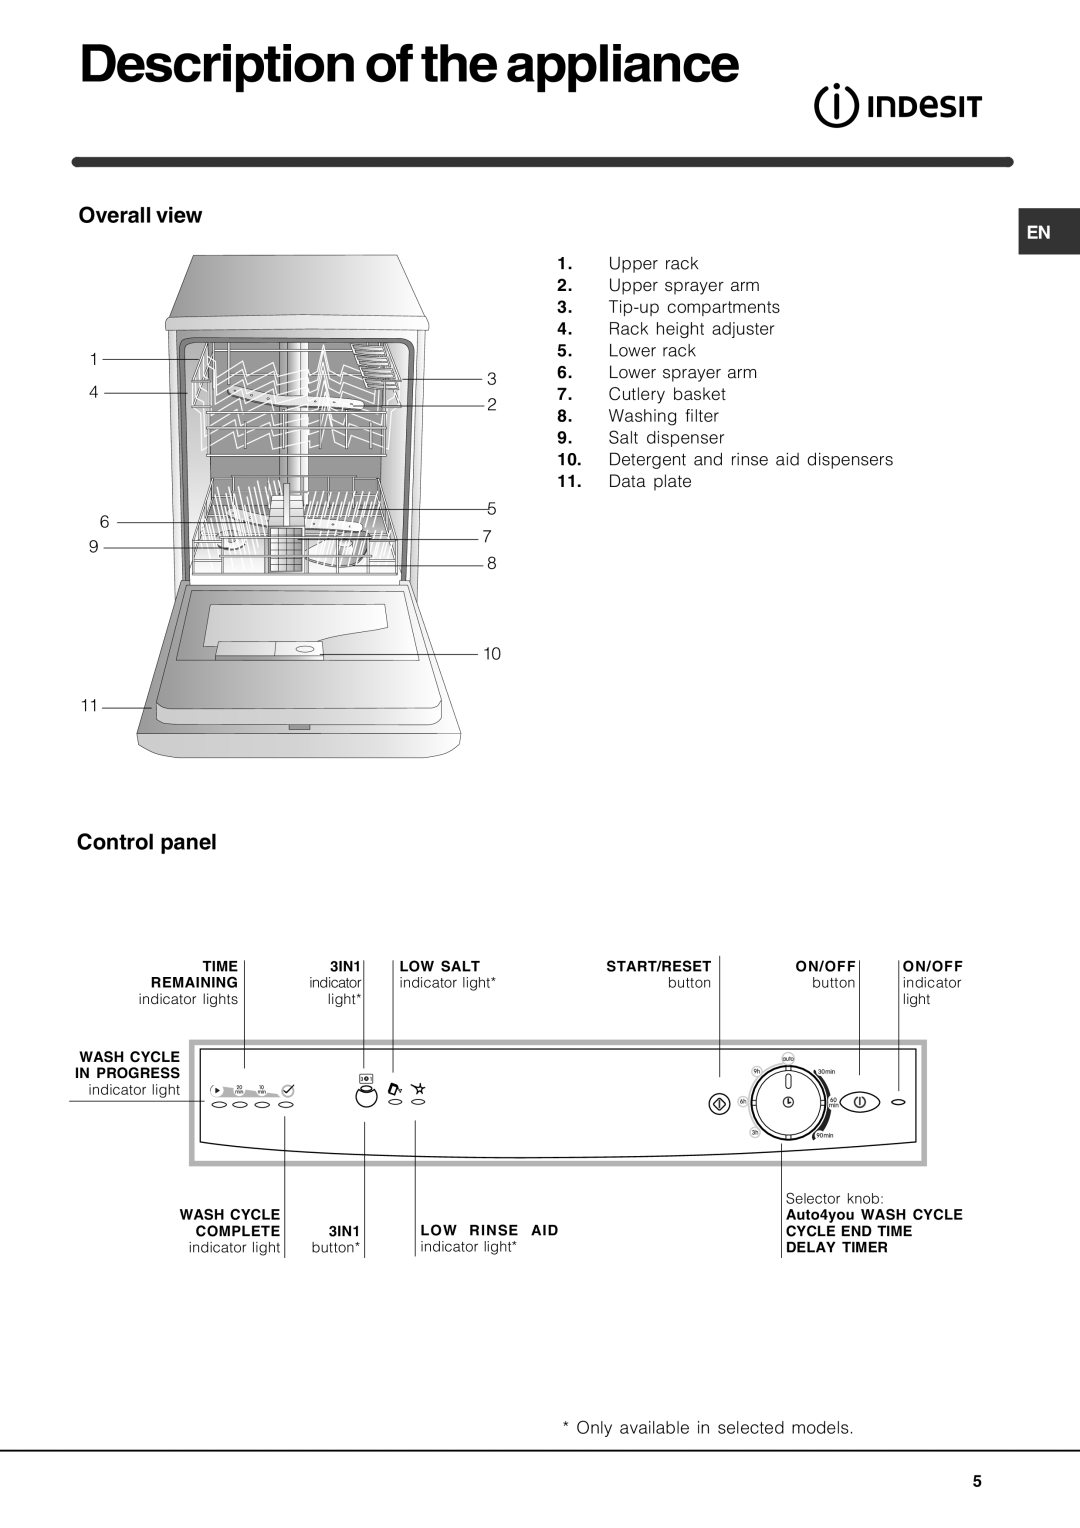 Indesit IDTM manual Description of the appliance, Overall view, Control panel 